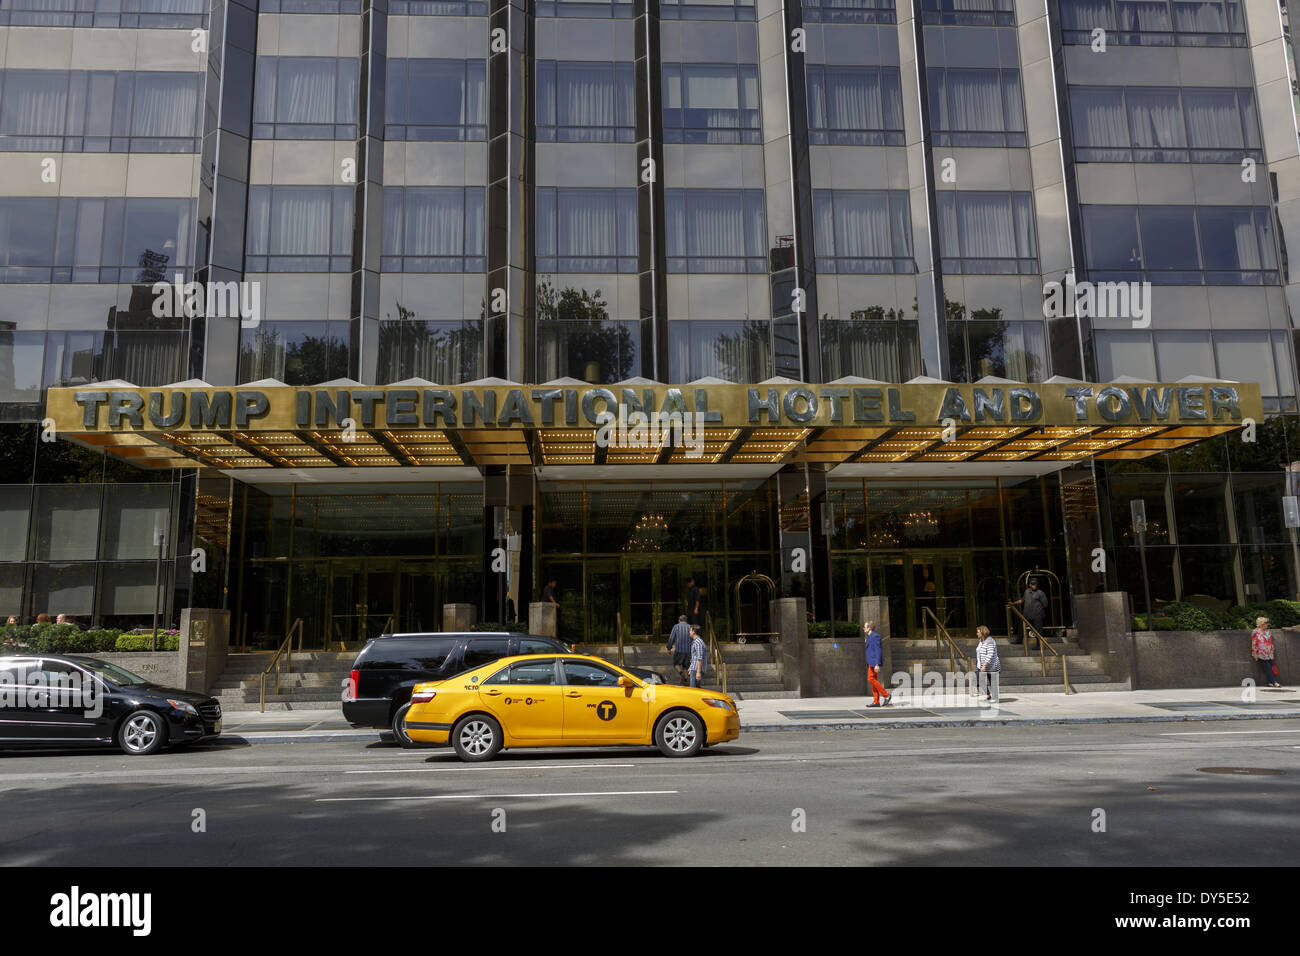 Trump International Hotel and Tower entrance New York Stock Photo